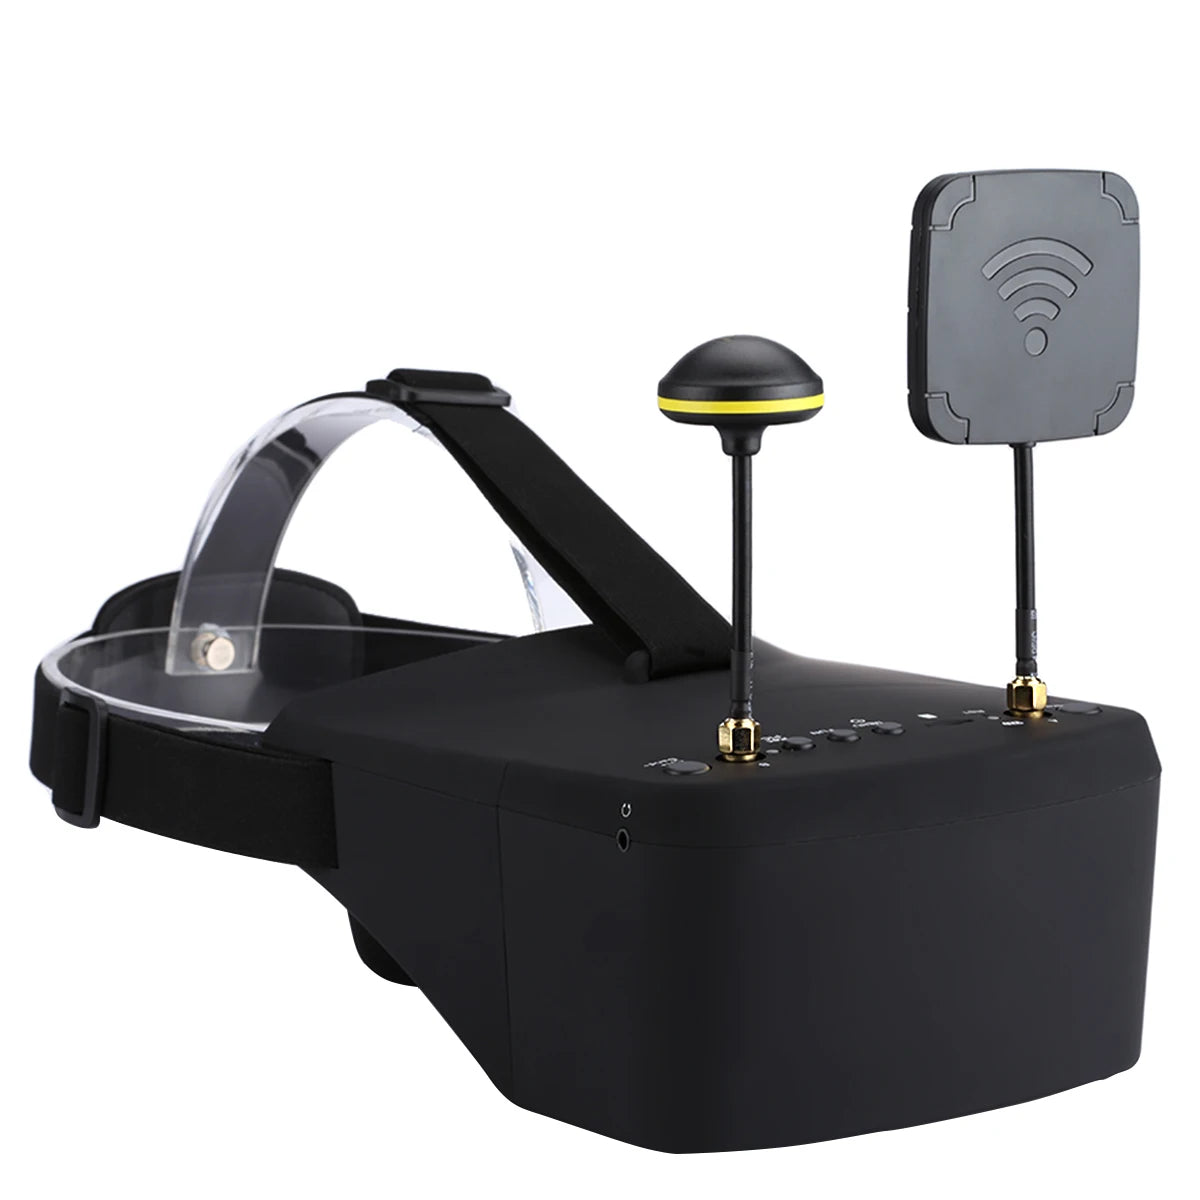 EV800D 5.8G 40CH FPV Goggle, 5GHz, with RaceBand; Advanced auto-searching function and the working frequency show